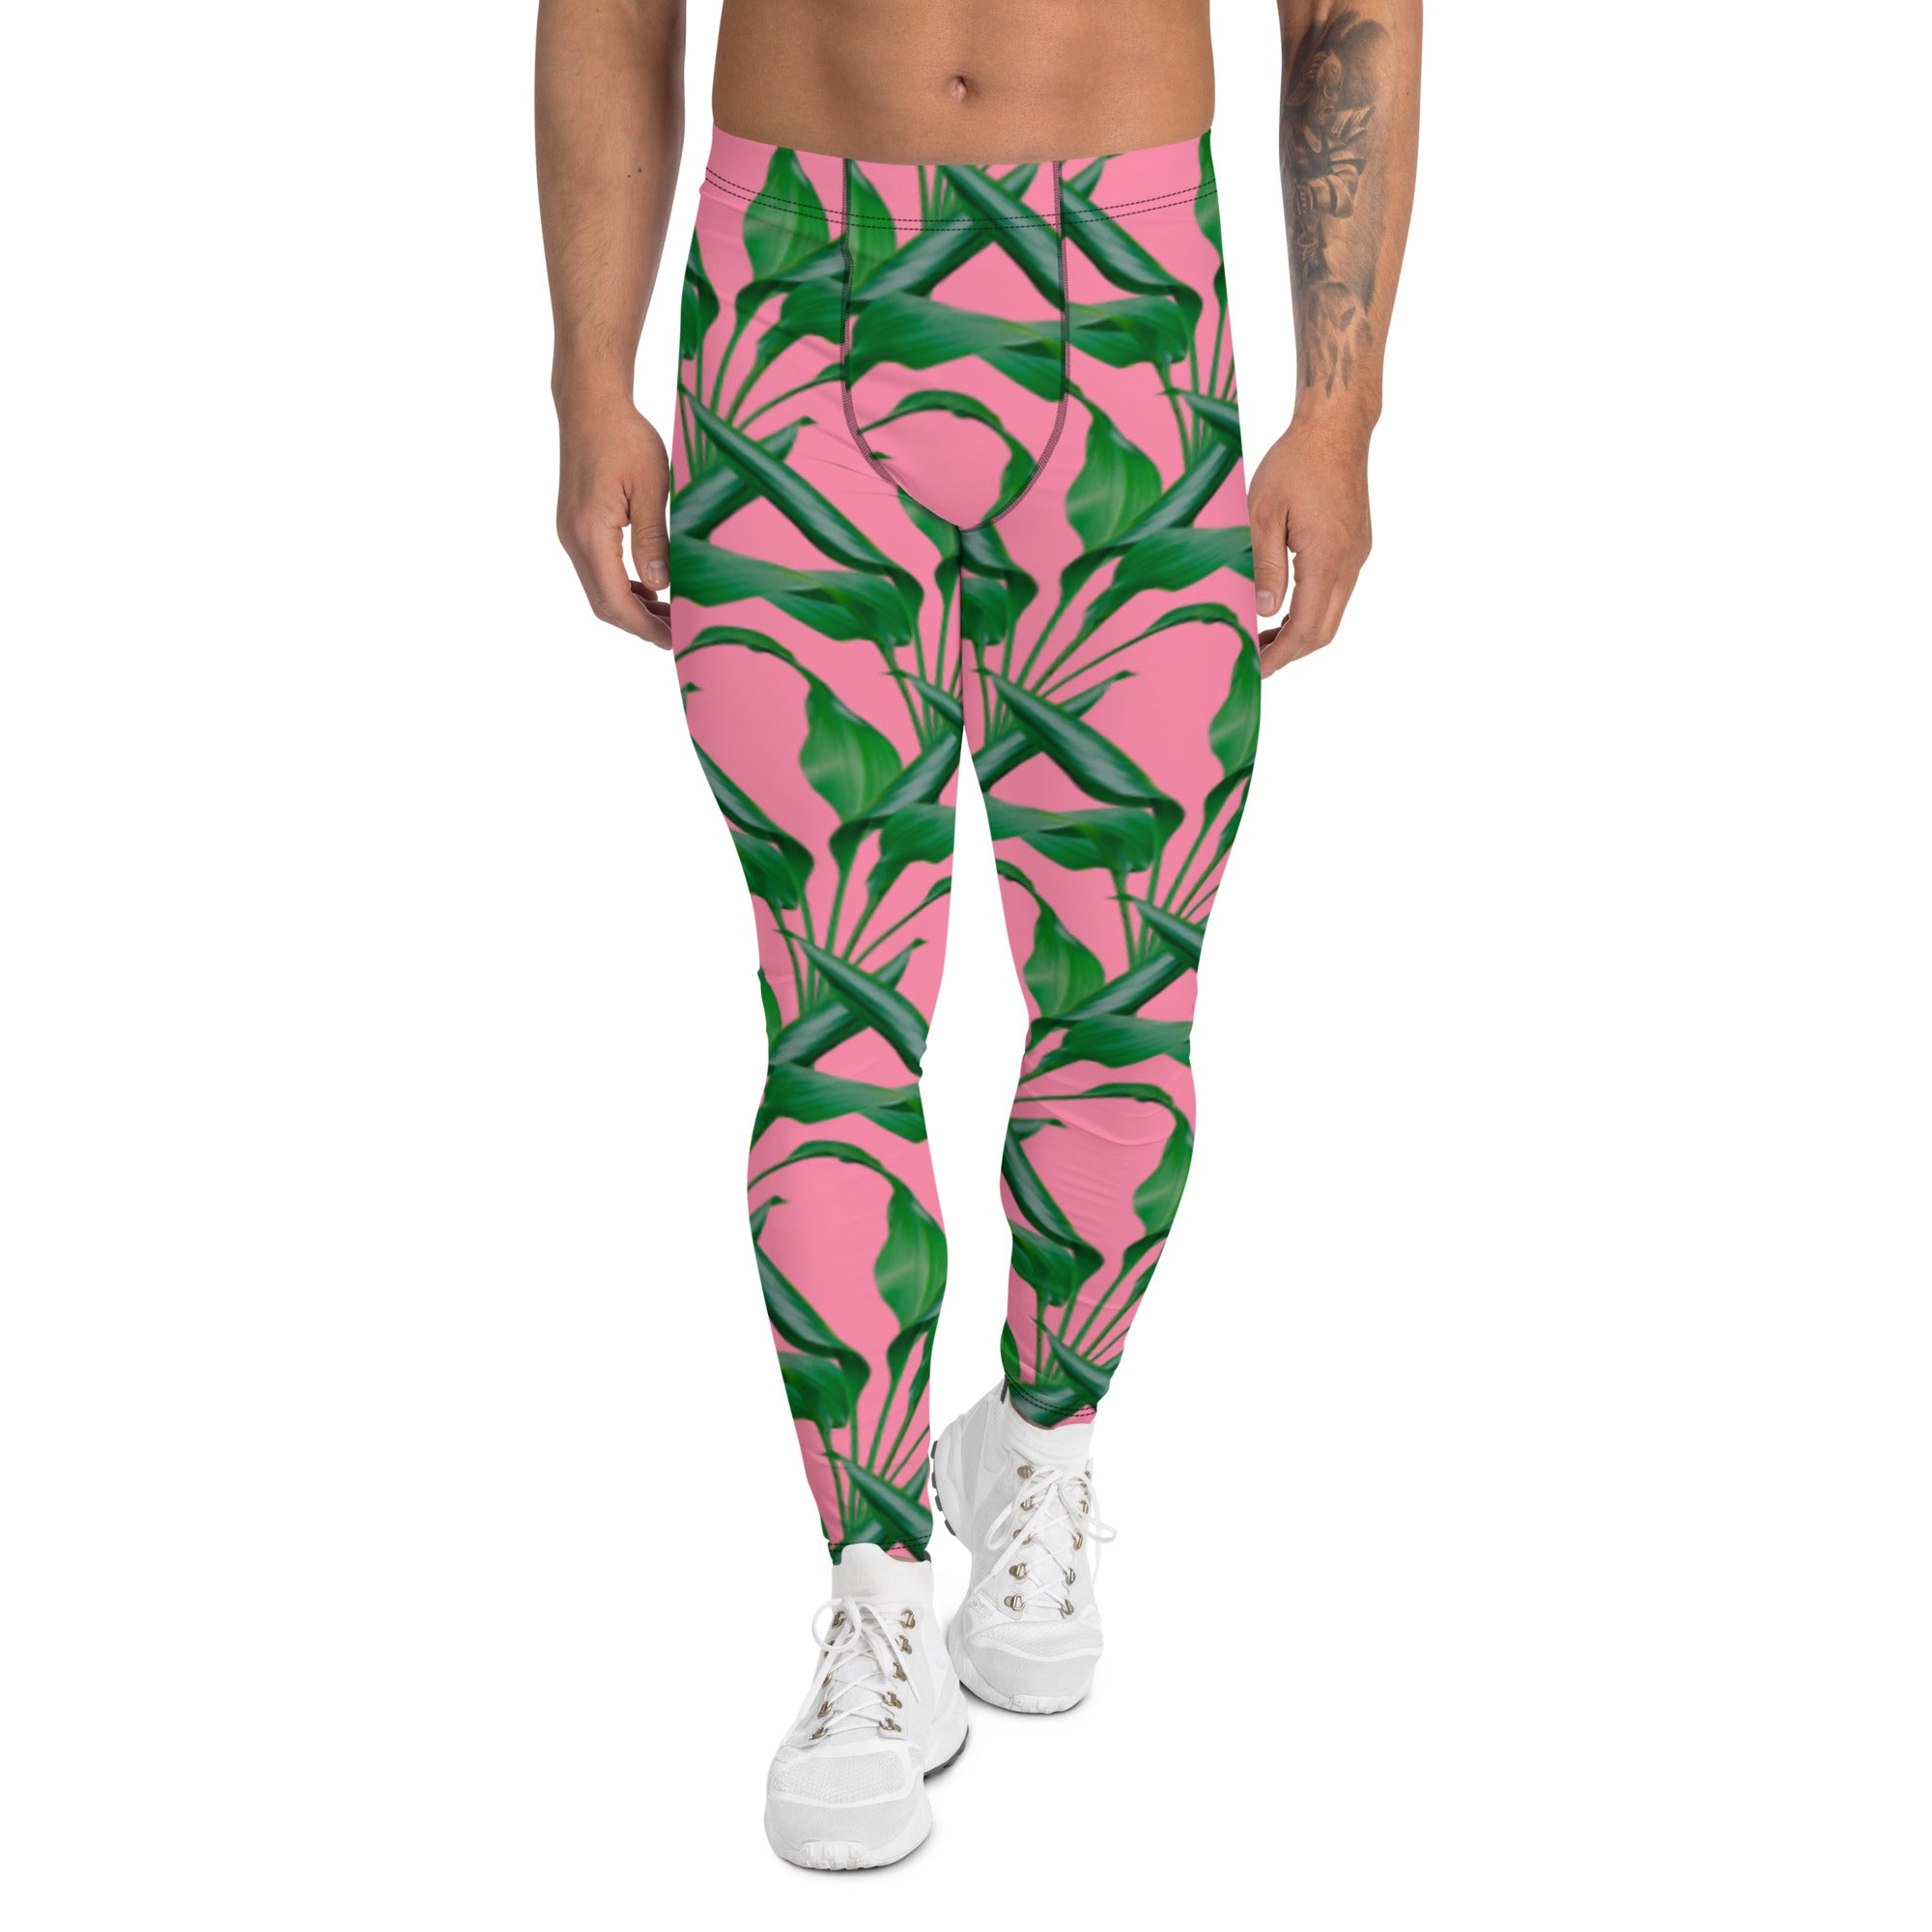 Green Pink Tropical Men's Leggings, Tropical Leaves Print Designer Print Sexy Meggings Men's Workout Gym Tights Leggings, Men's Compression Tights Pants - Made in USA/ EU/ MX (US Size: XS-3XL) 